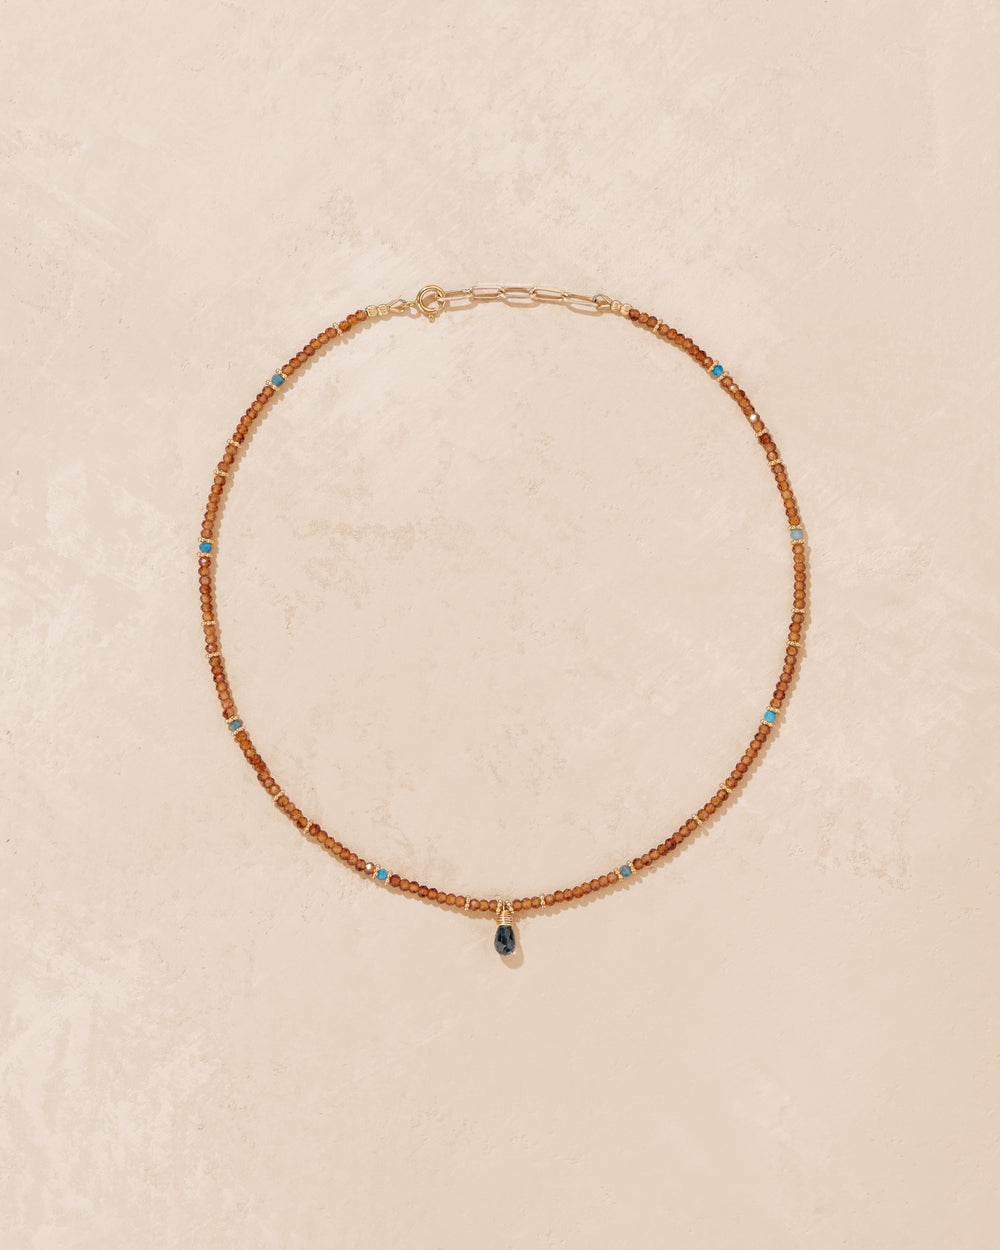 Tapaz necklace